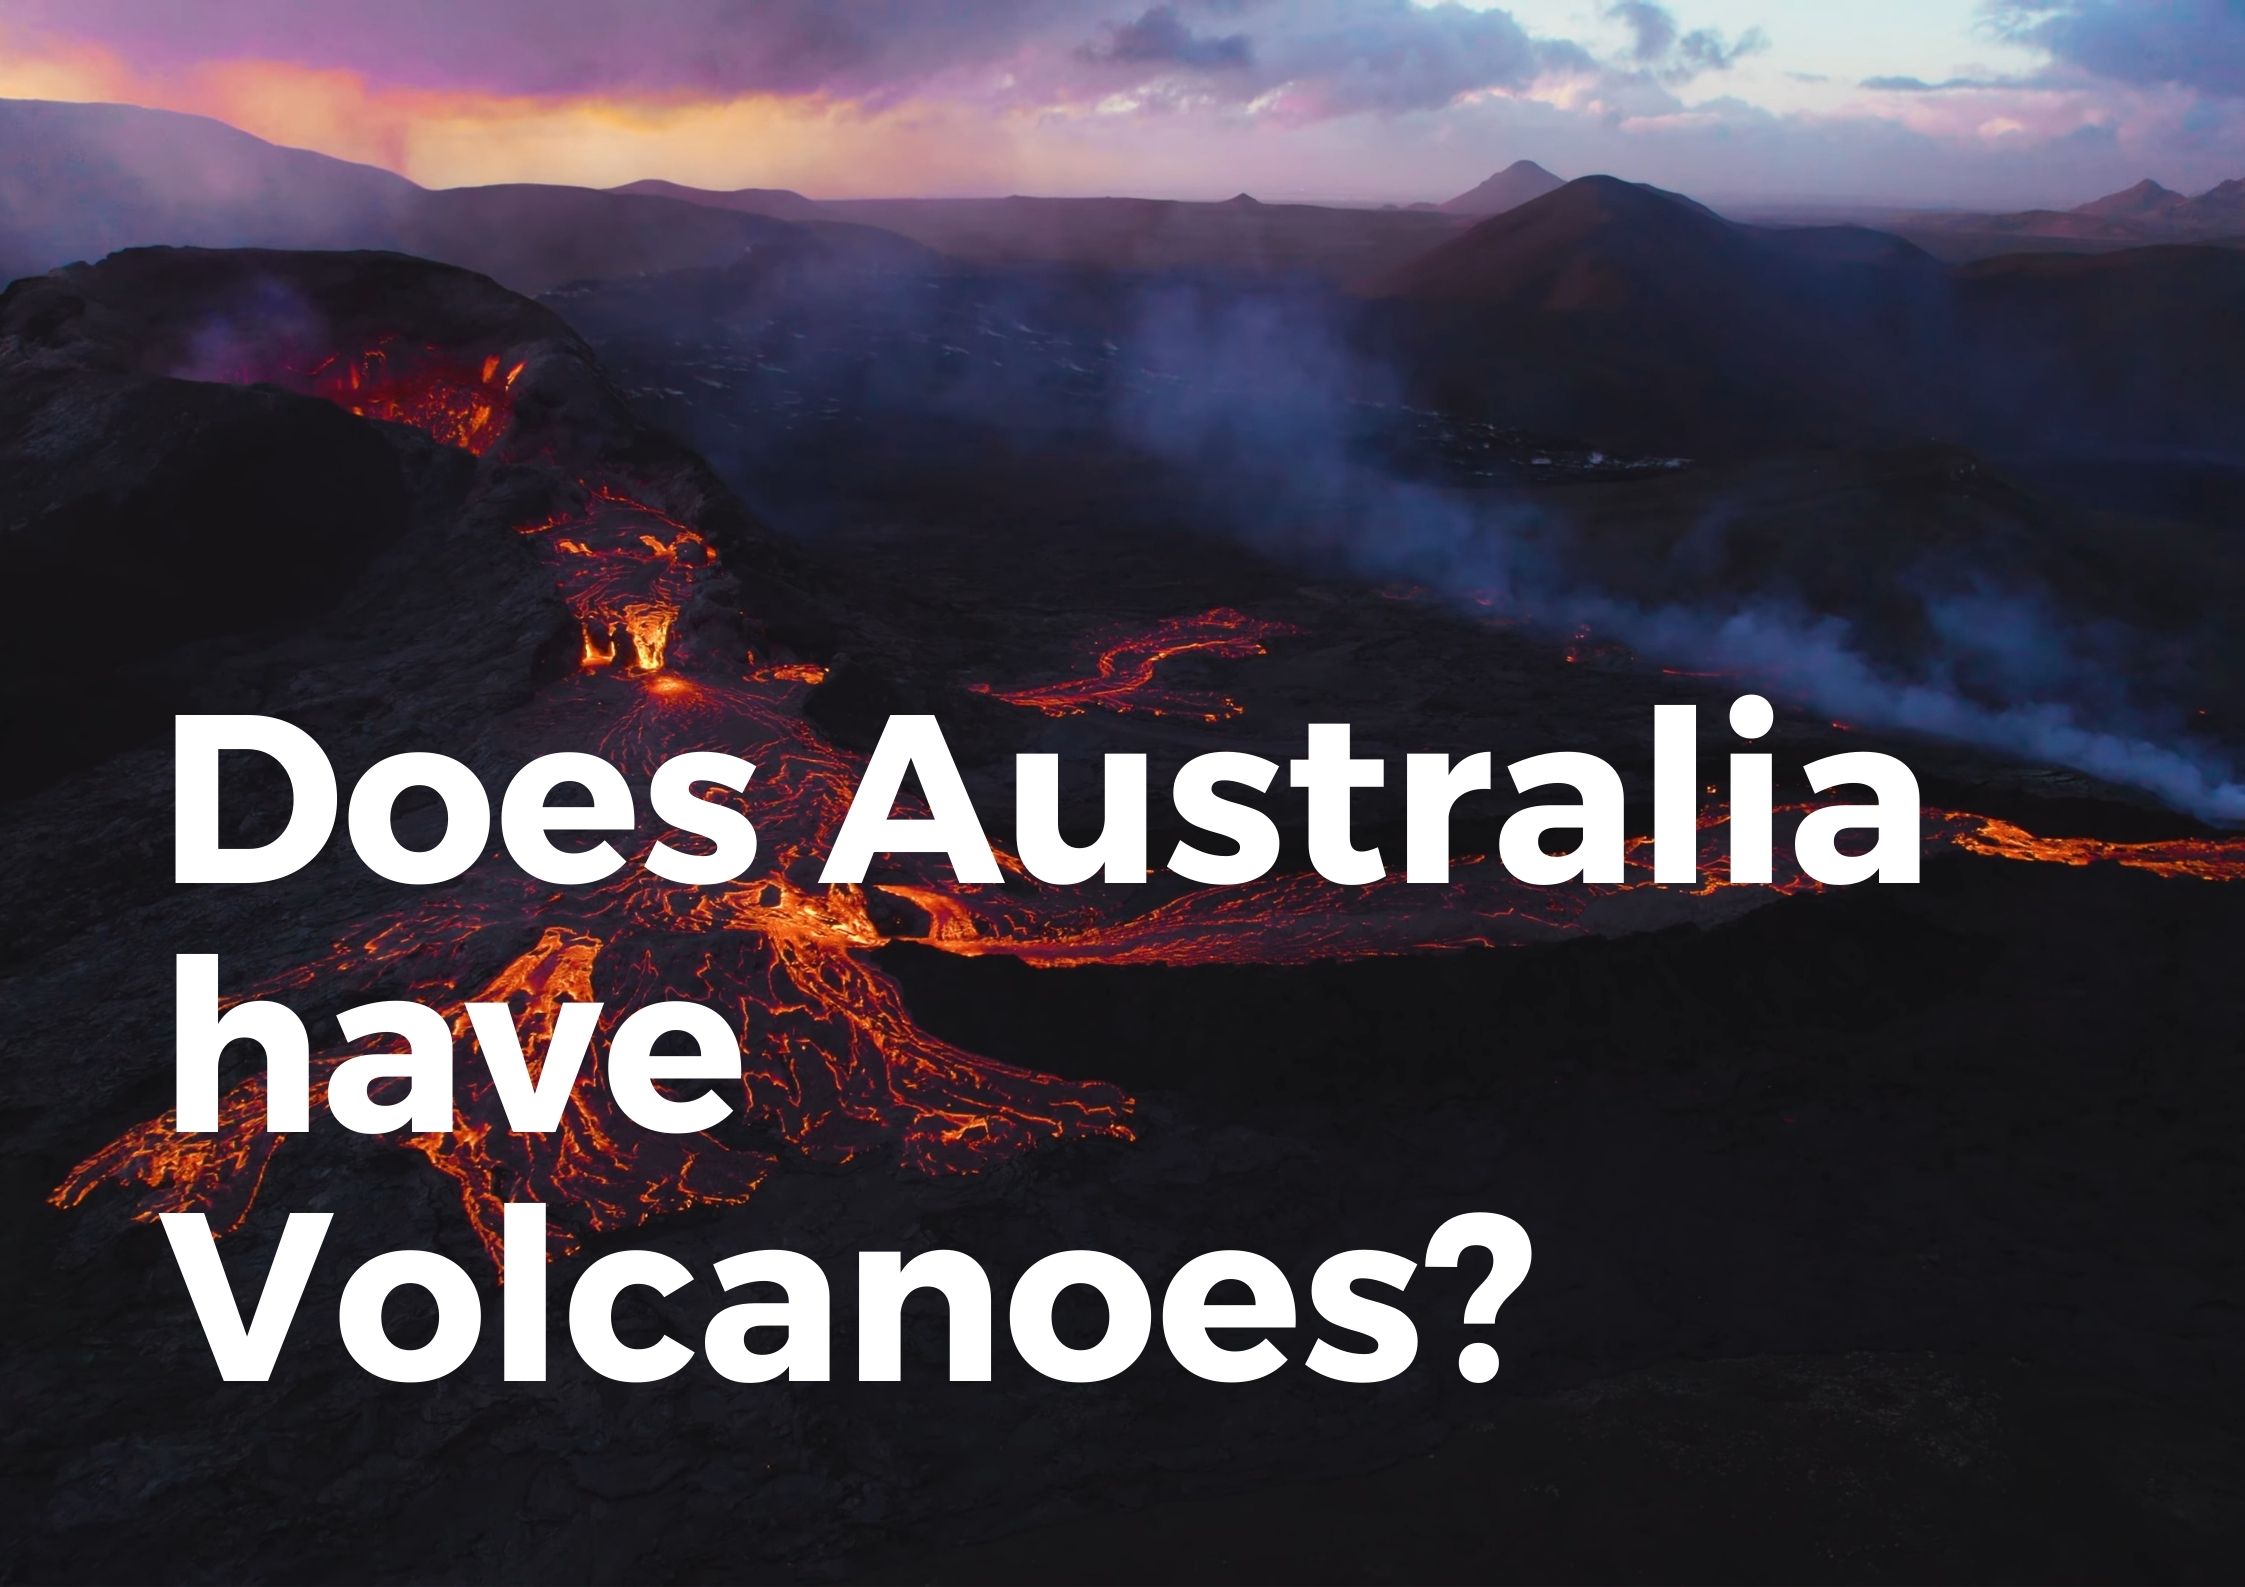 Are there volcanoes in Australia?